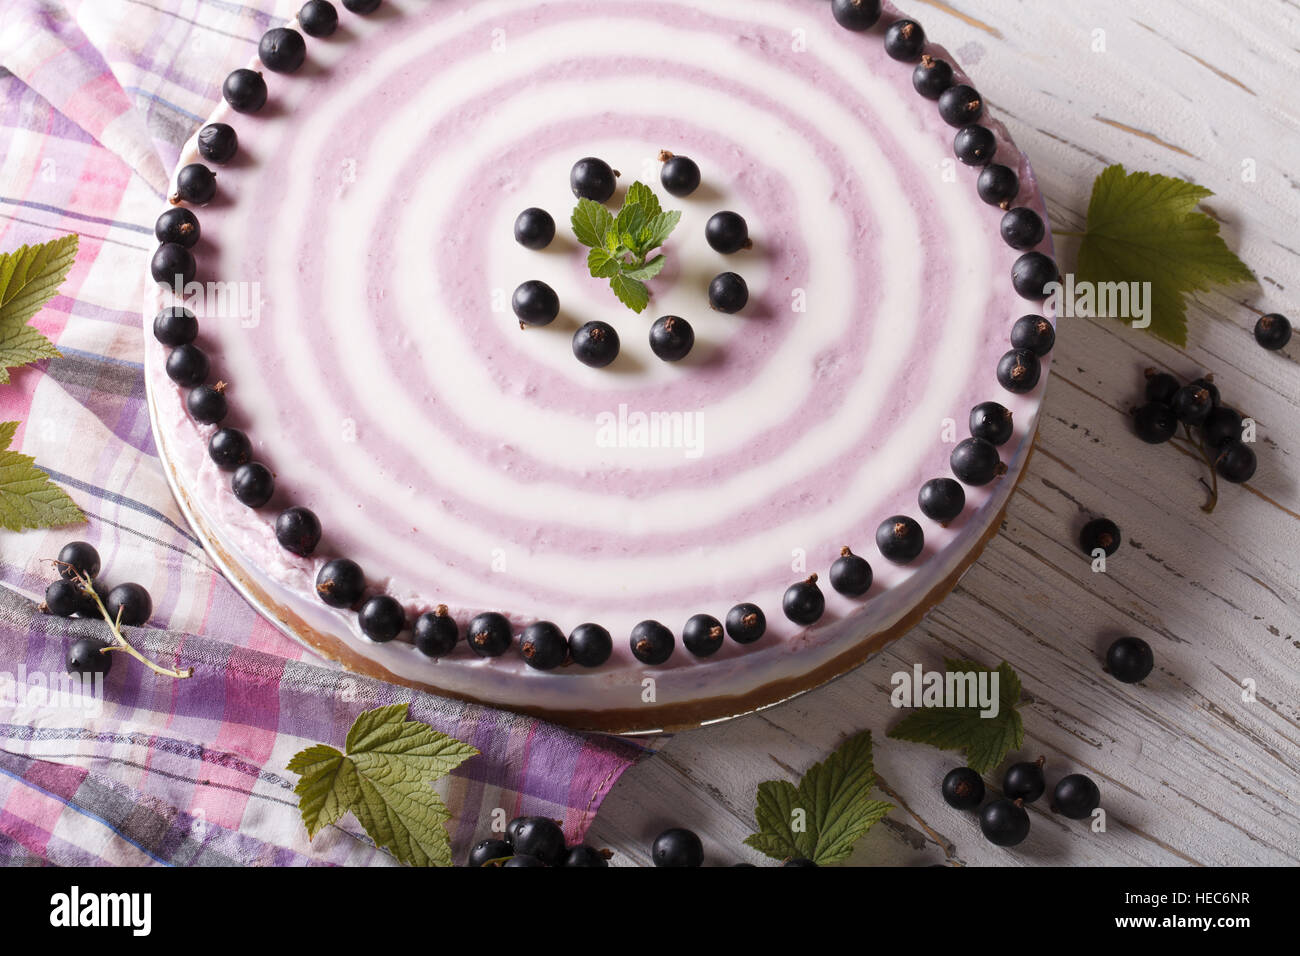 Round striped currant cheesecake close-up on the table. horizontal Stock Photo